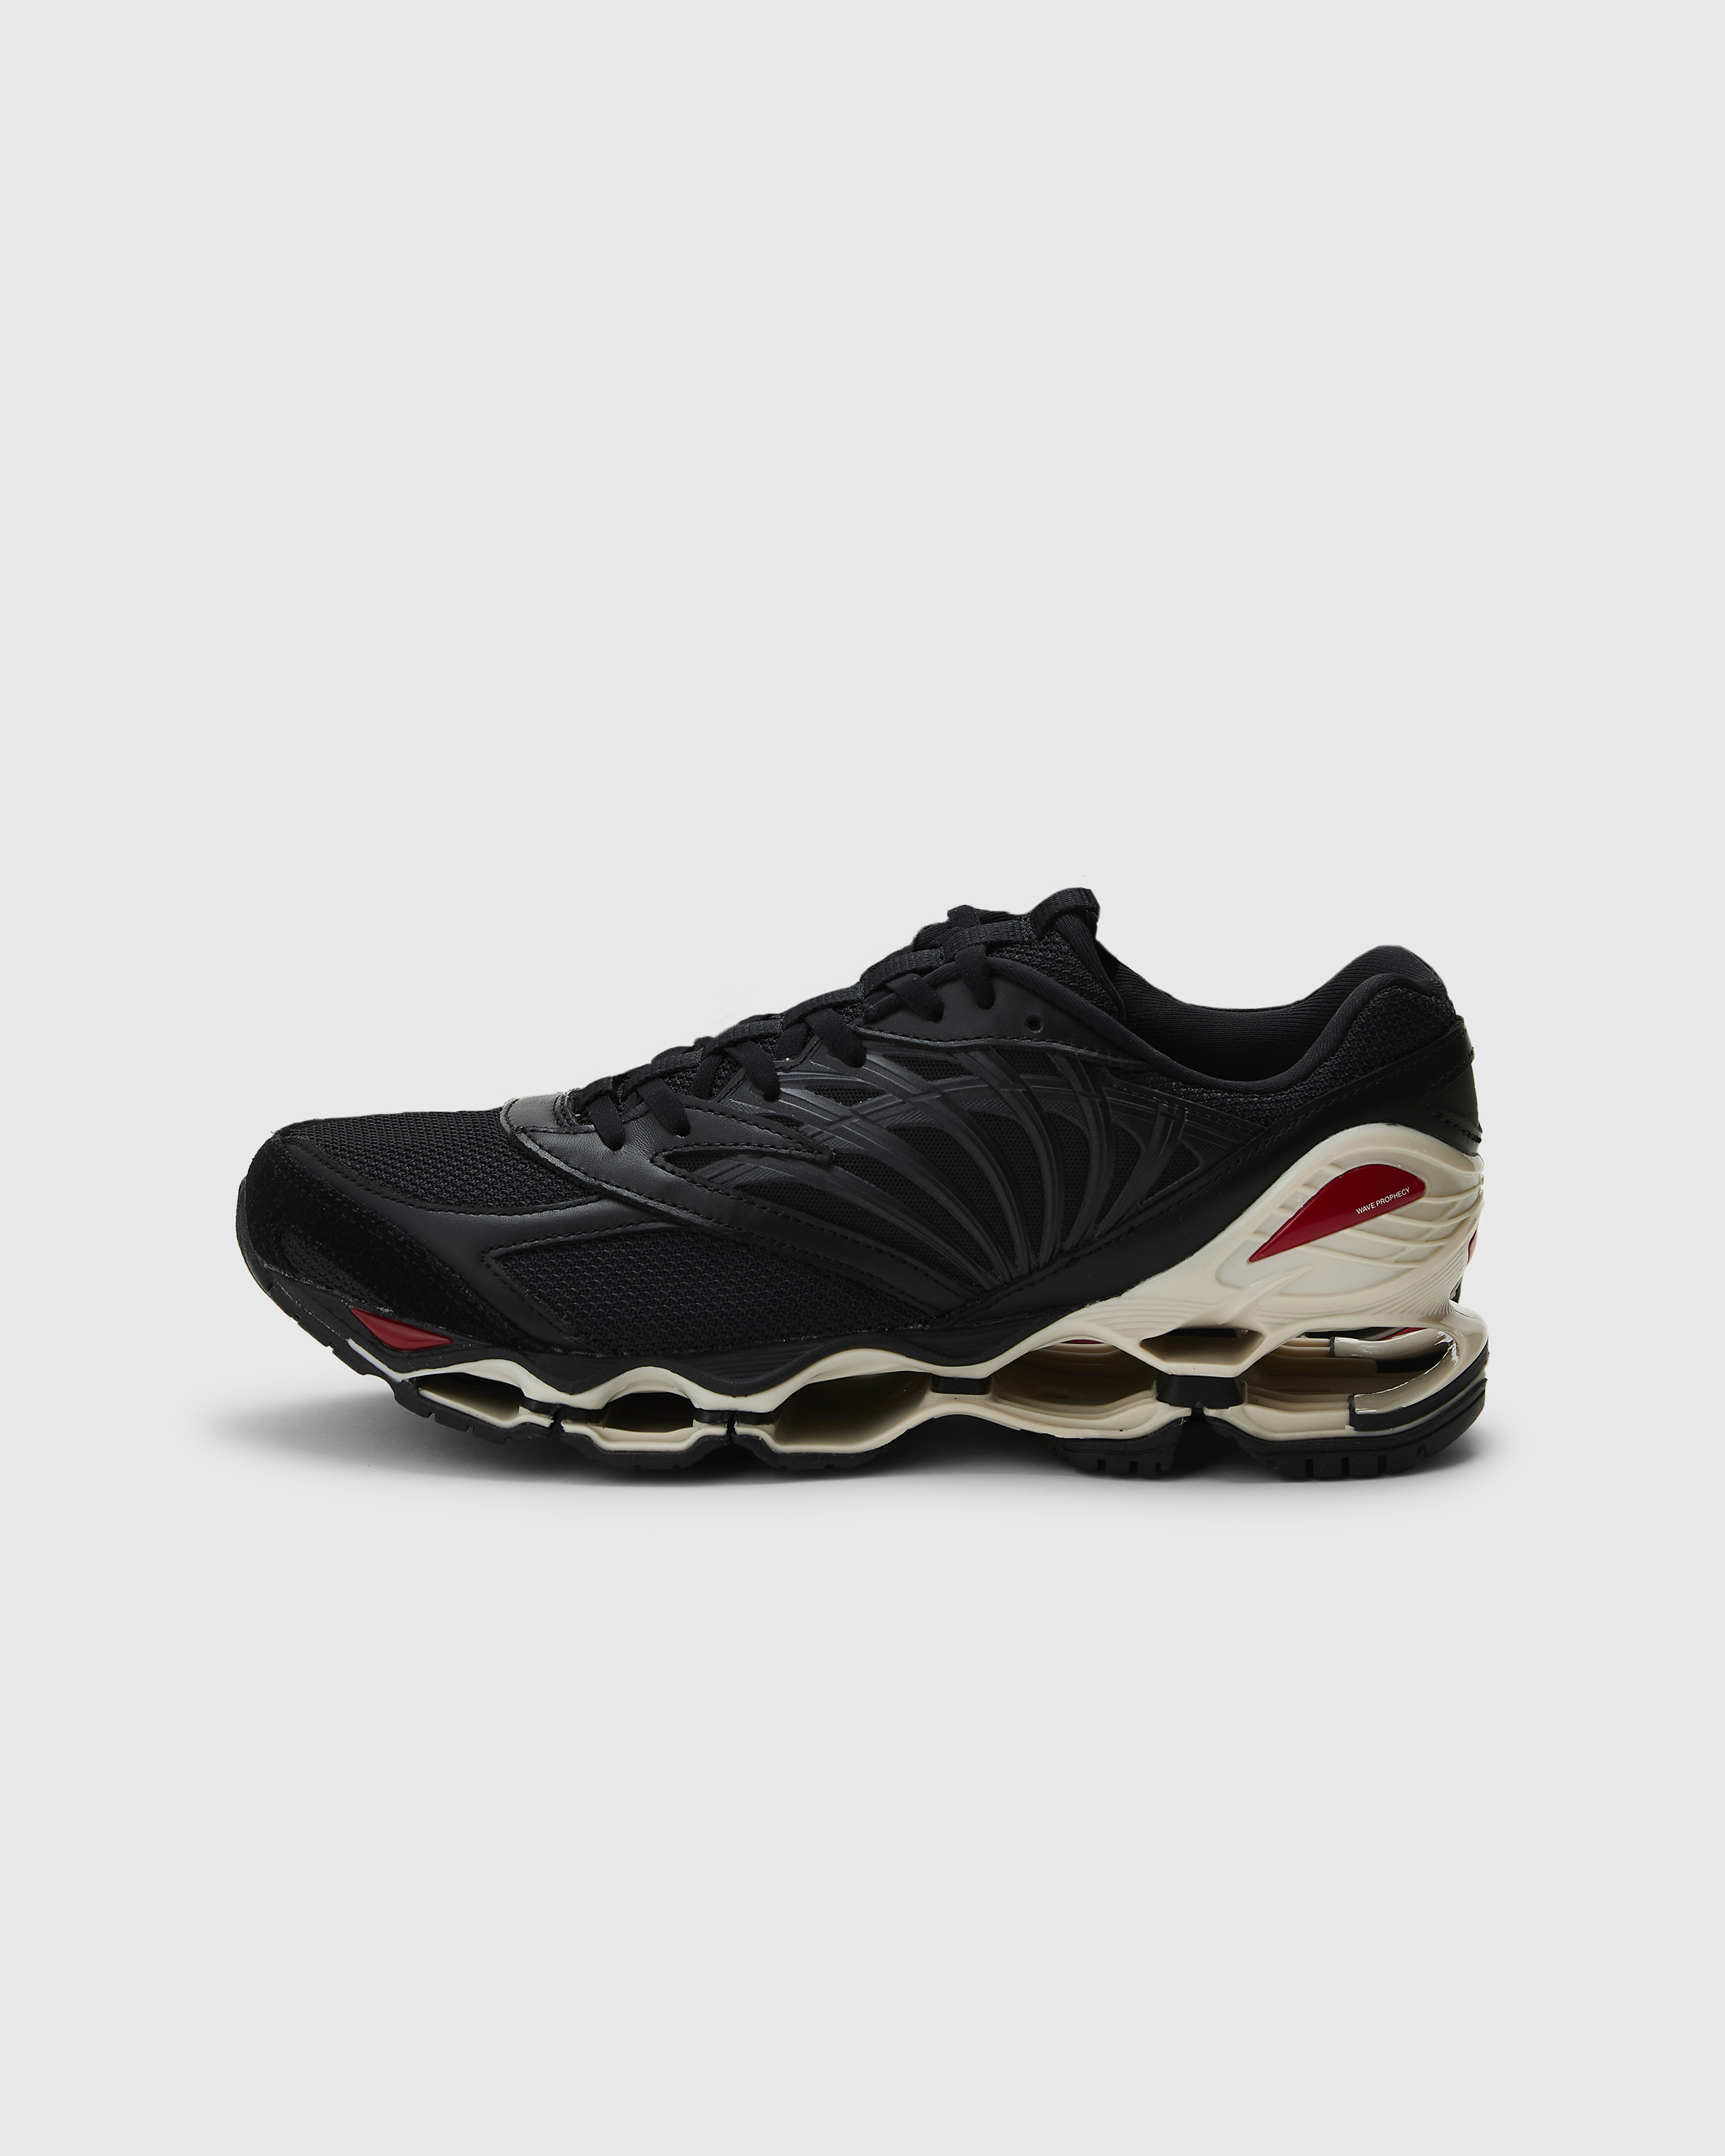 Mizuno – Wave Prophecy LS Graphpaper Black/Ivory/Red - Low Top Sneakers - Black - Image 2